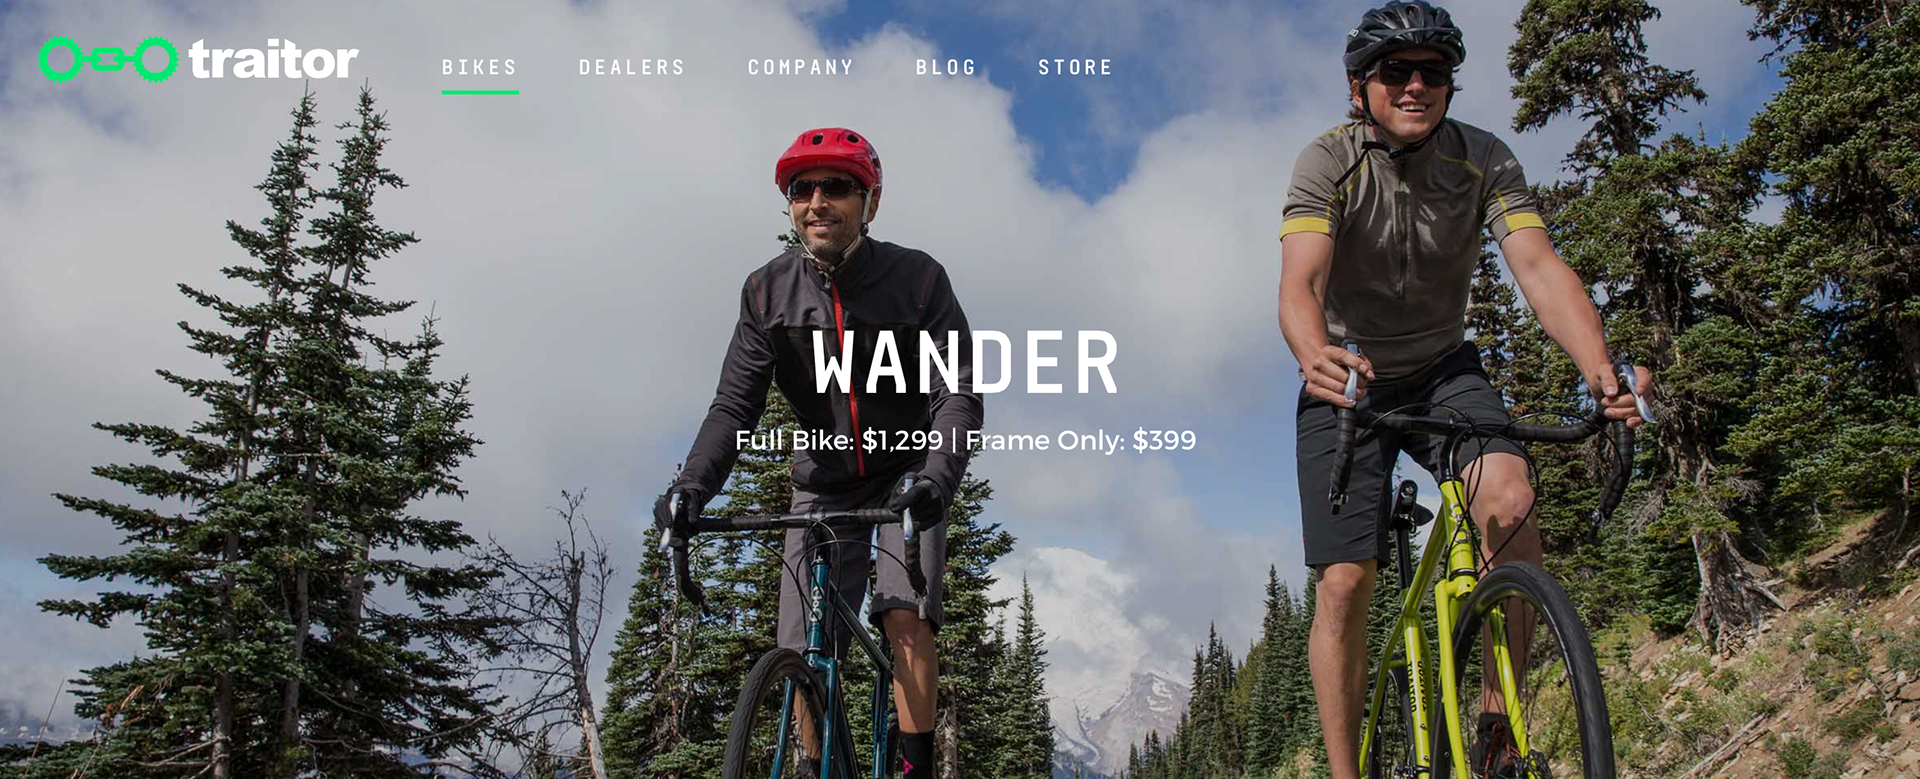   Case Study: Traitor Cycles Brand and Site Development   Strategy/Content/Execution 